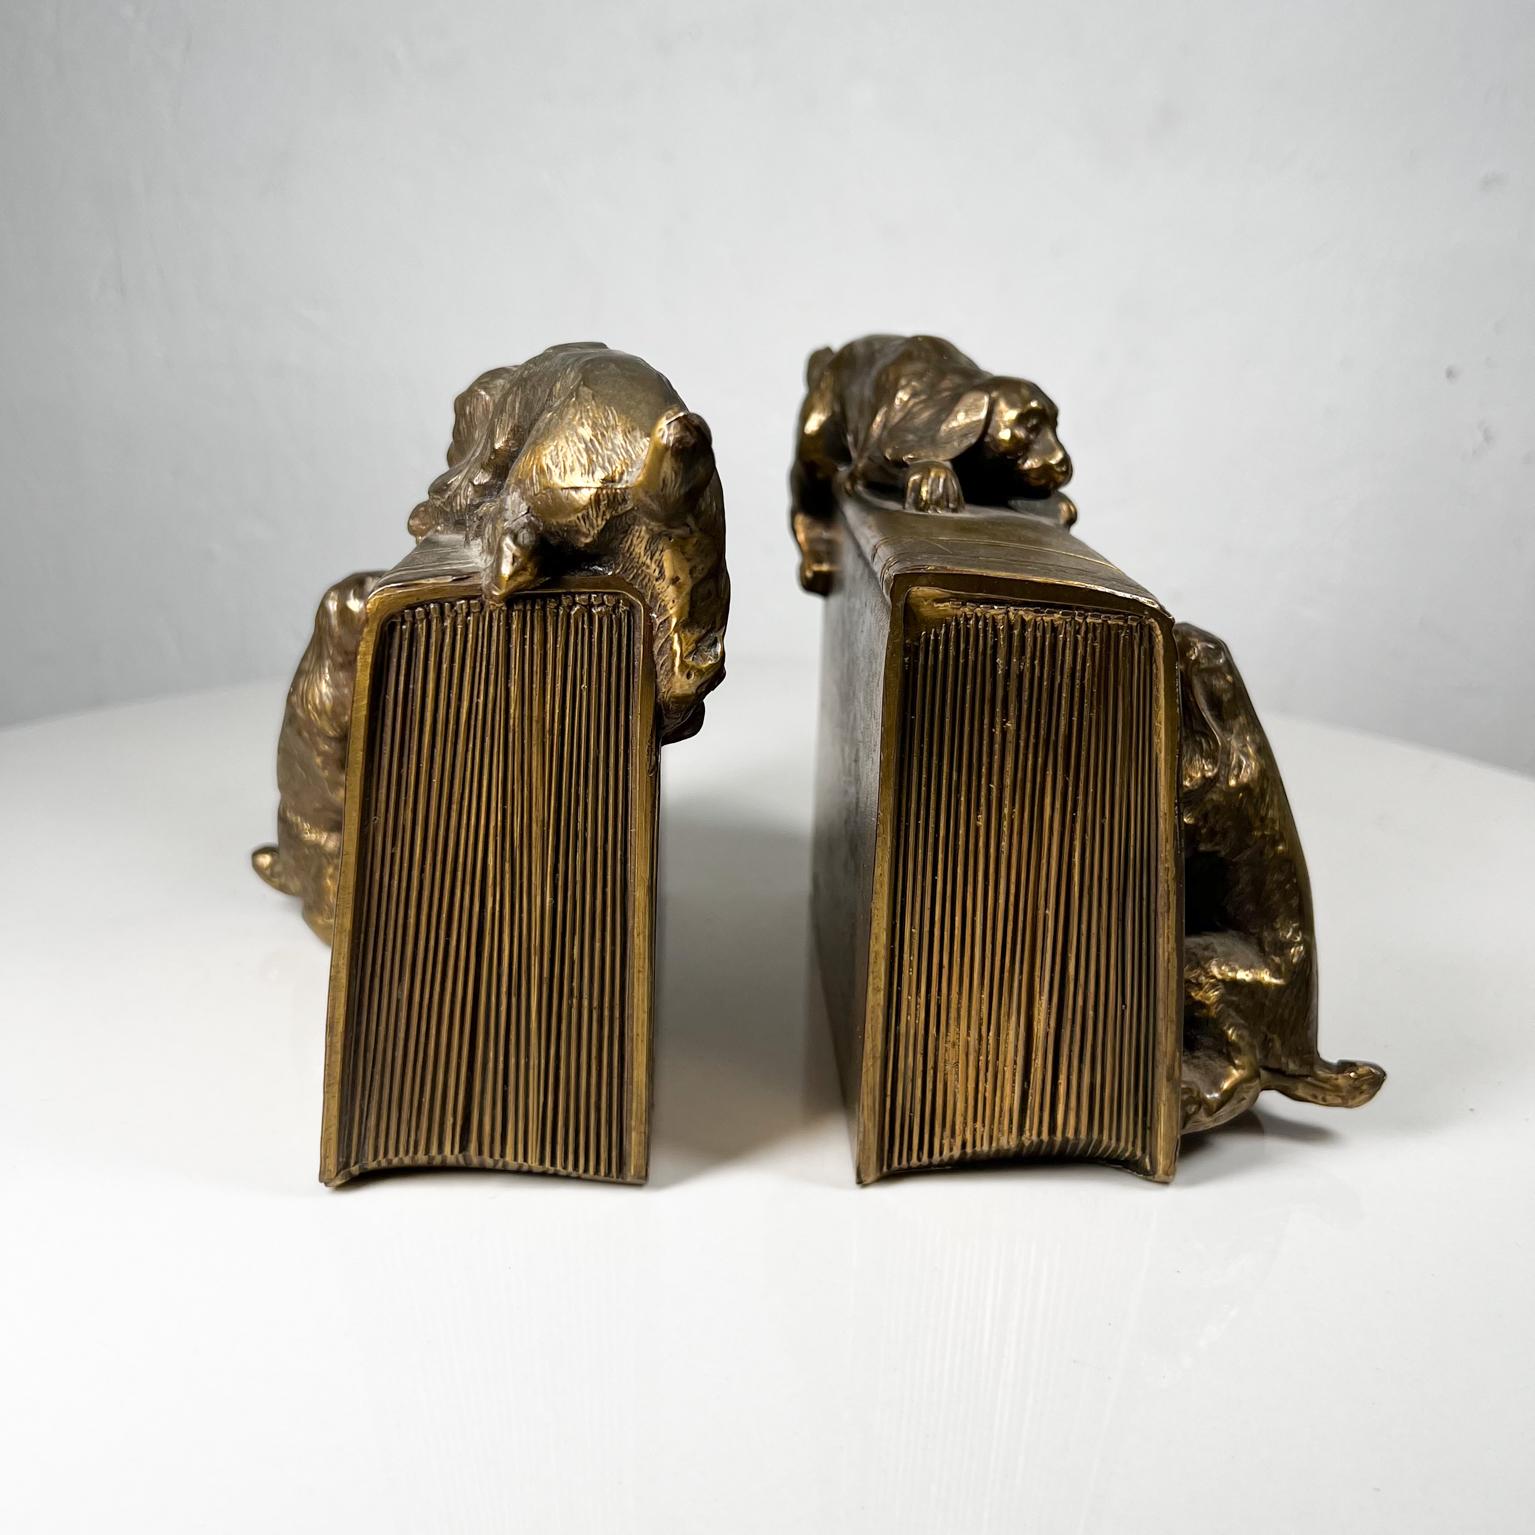 1930s bronze brass cocker spaniel dog bookends Florida USA
Made in the USA by the PM Craftsman Company of Eaton Park, FL. circa1930.
Maker stamp
Measures: 6.38 w x 3.88 d x 5.75 tall (each)
Vintage pair of bookends dogs on books.
Missing felt